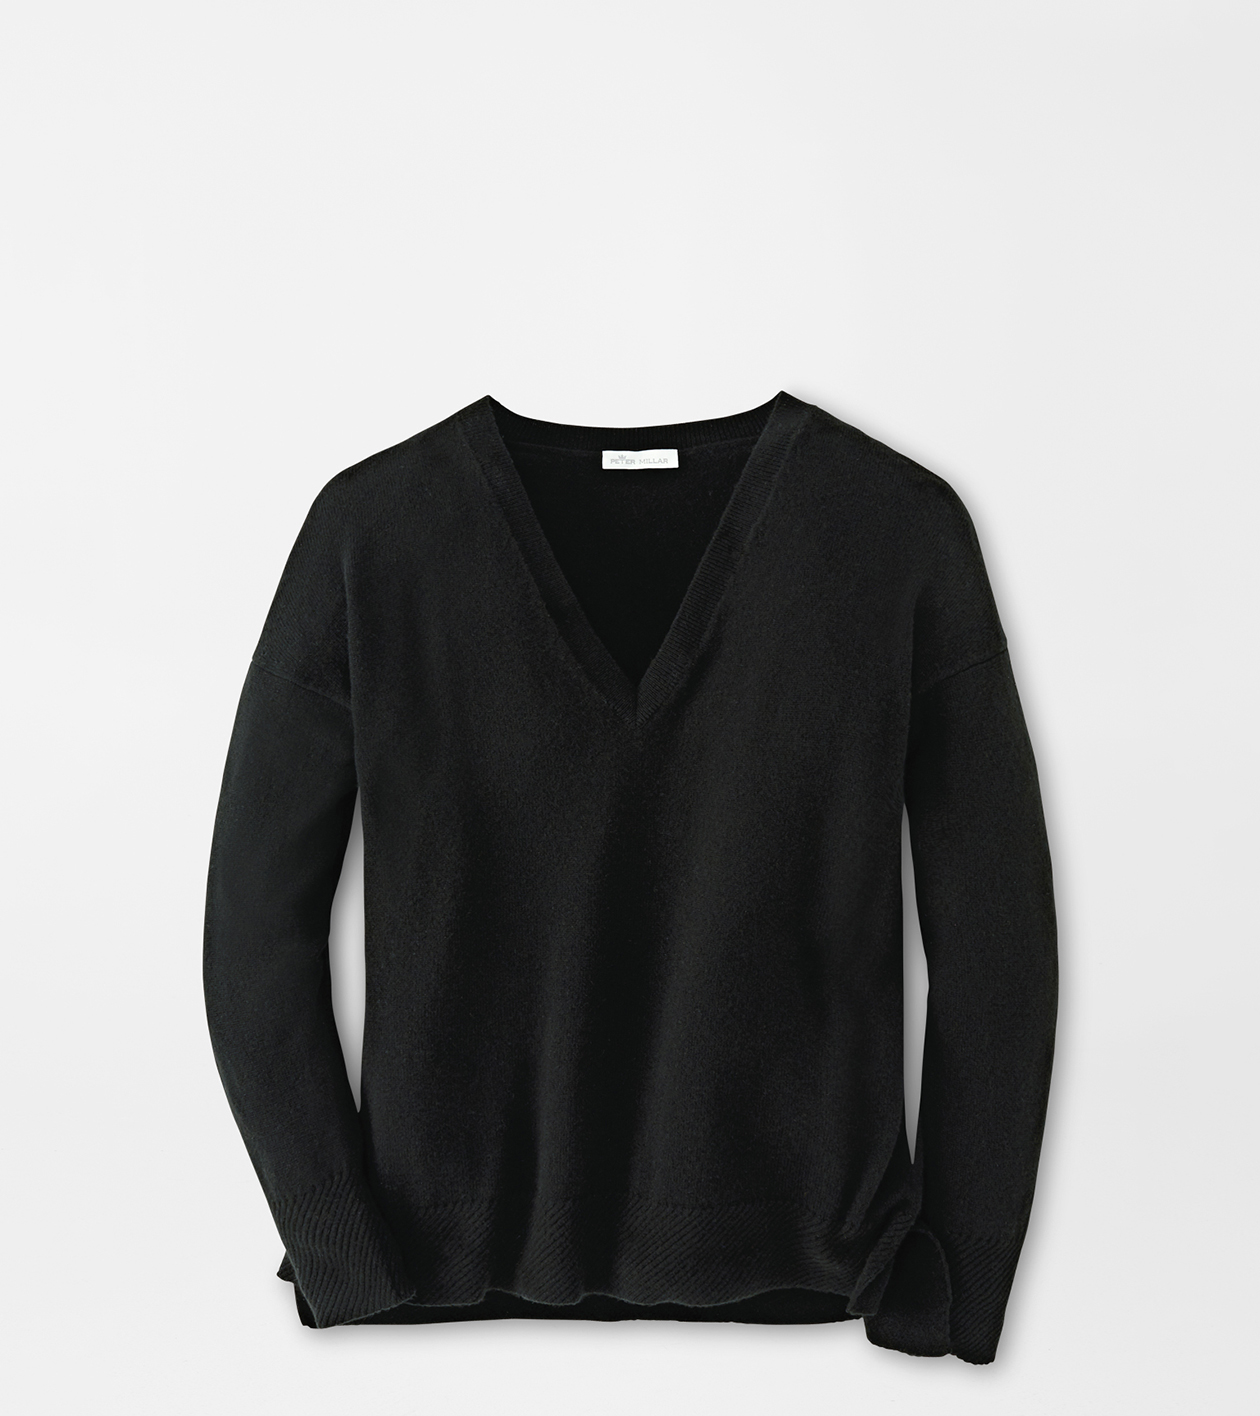 Artisan Crafted Cashmere V-Neck Sweater